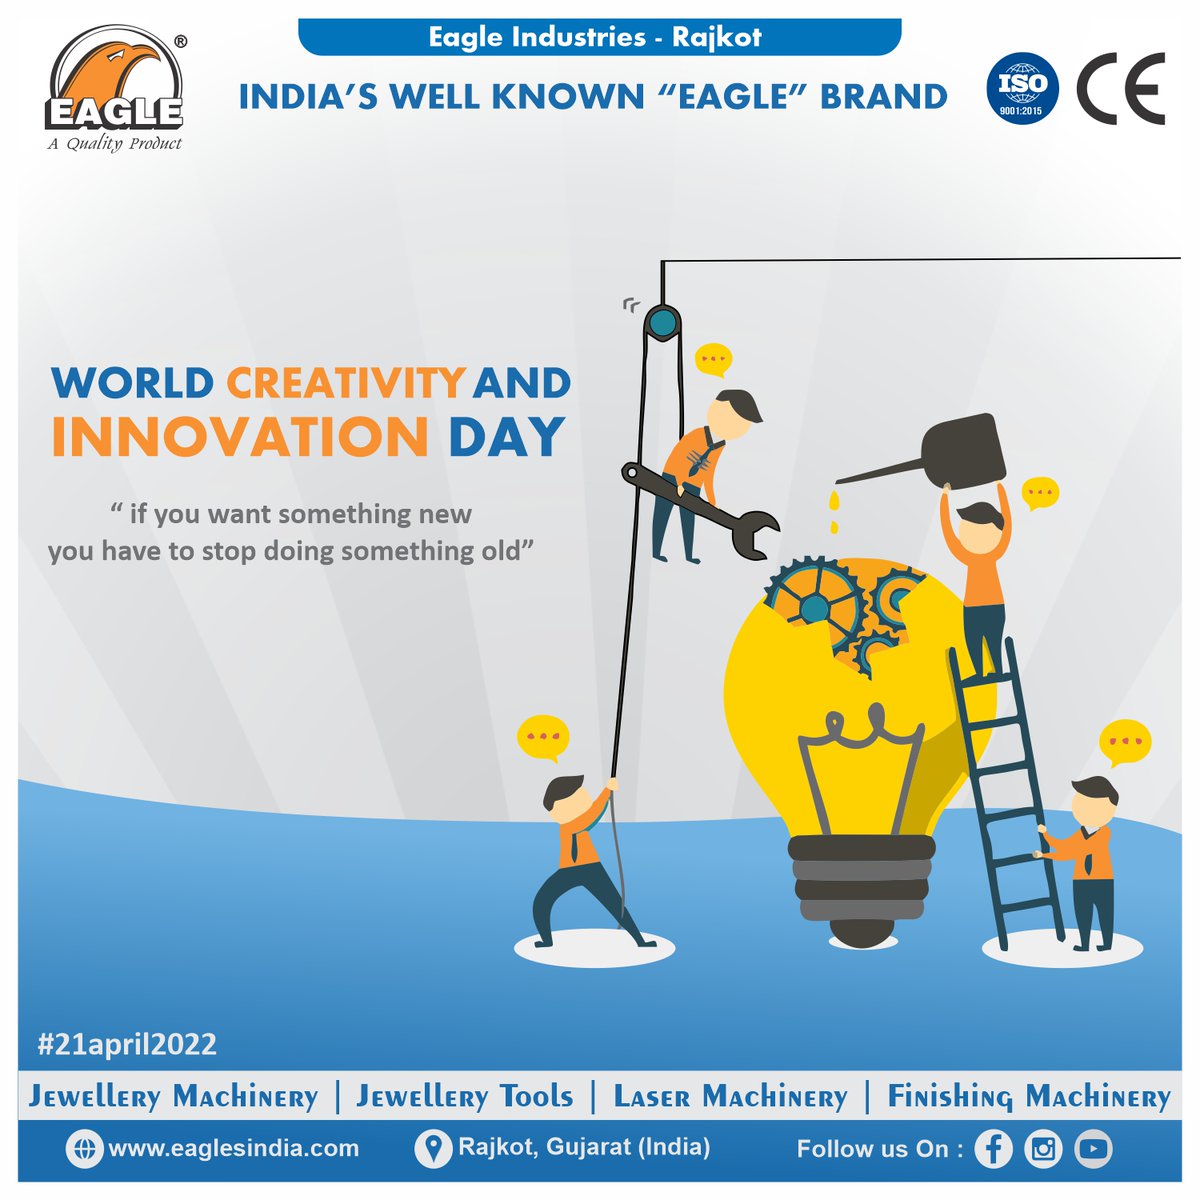 Happy World Creativity And Innovation Day
#happyworldcreativityandinnovationday
#creativity #innovation #new #today #21april #april2022